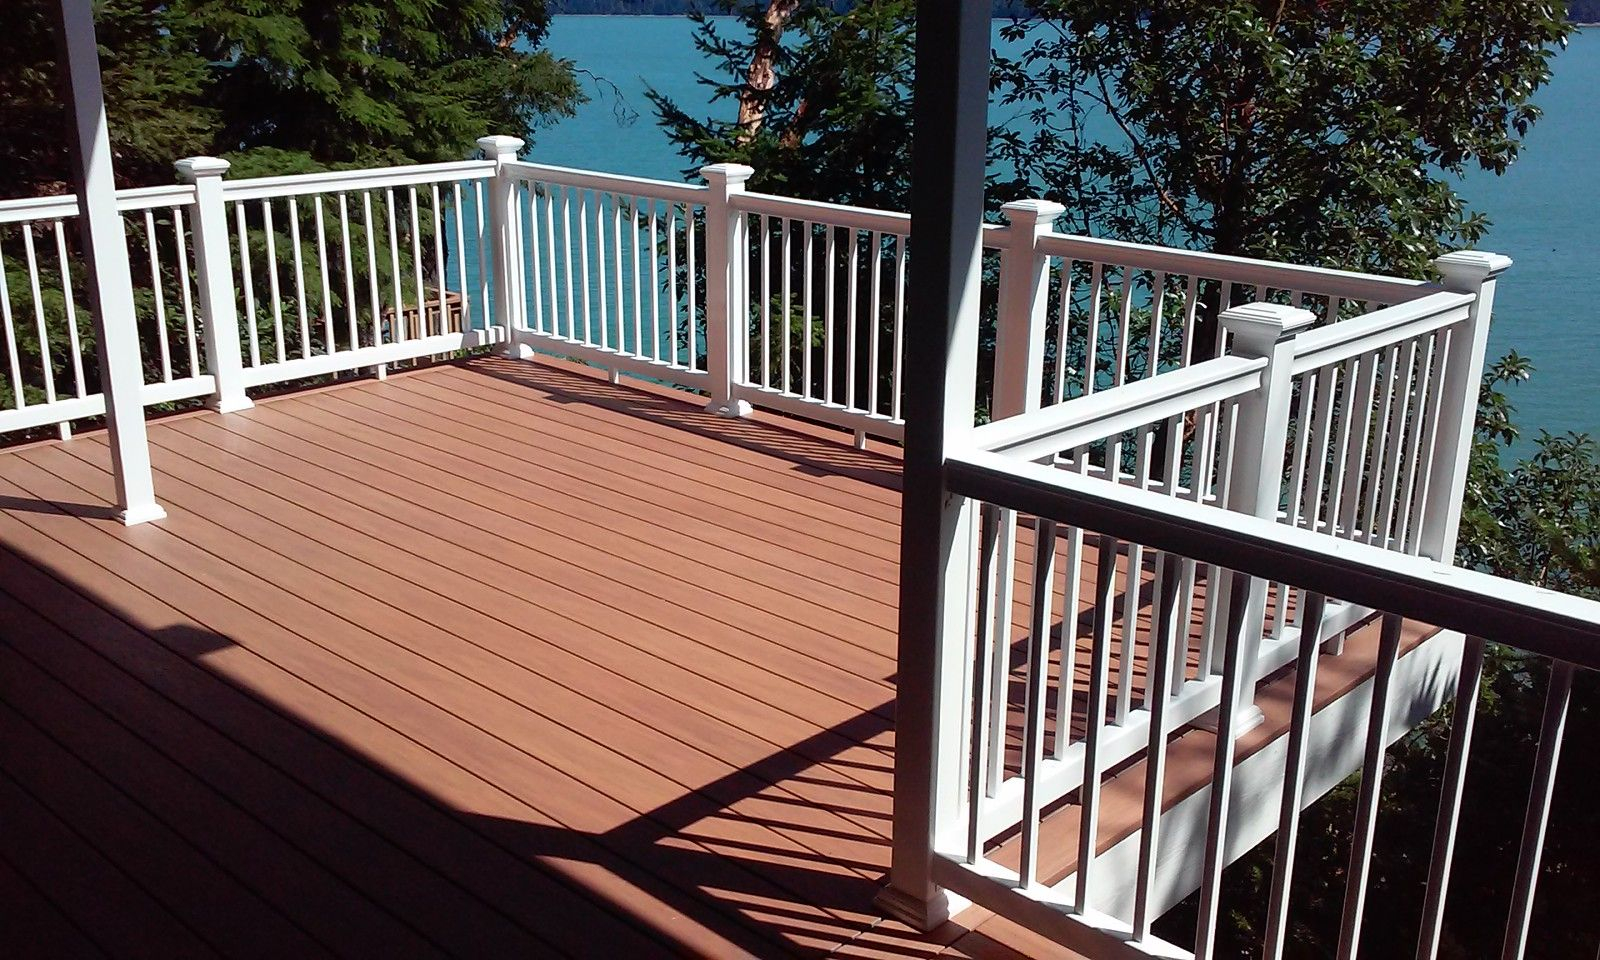 Gallery Image Pvc Decking Outdoor Living And Decking in size 1600 X 960